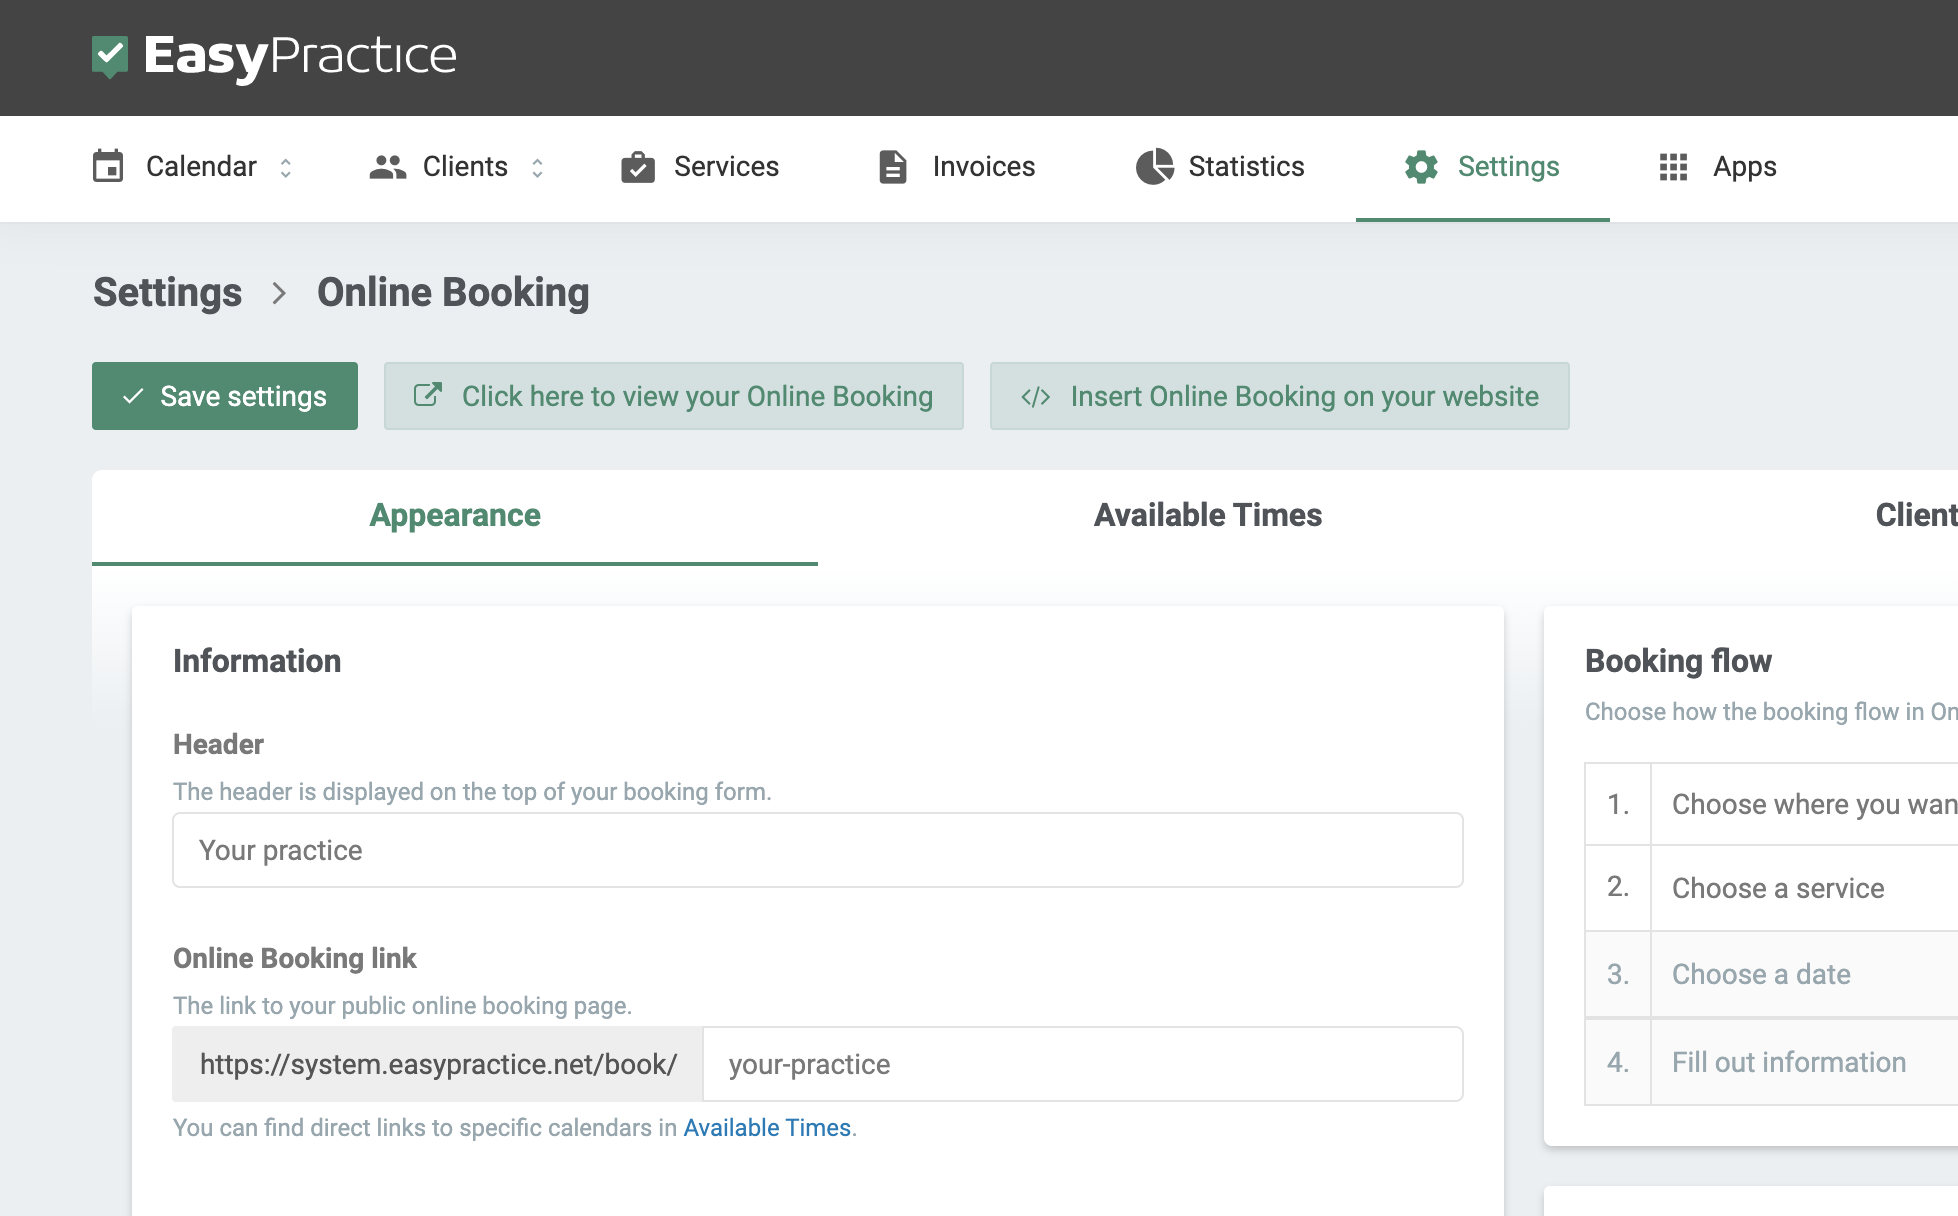 Screenshot of the online booking settings in EasyPractice